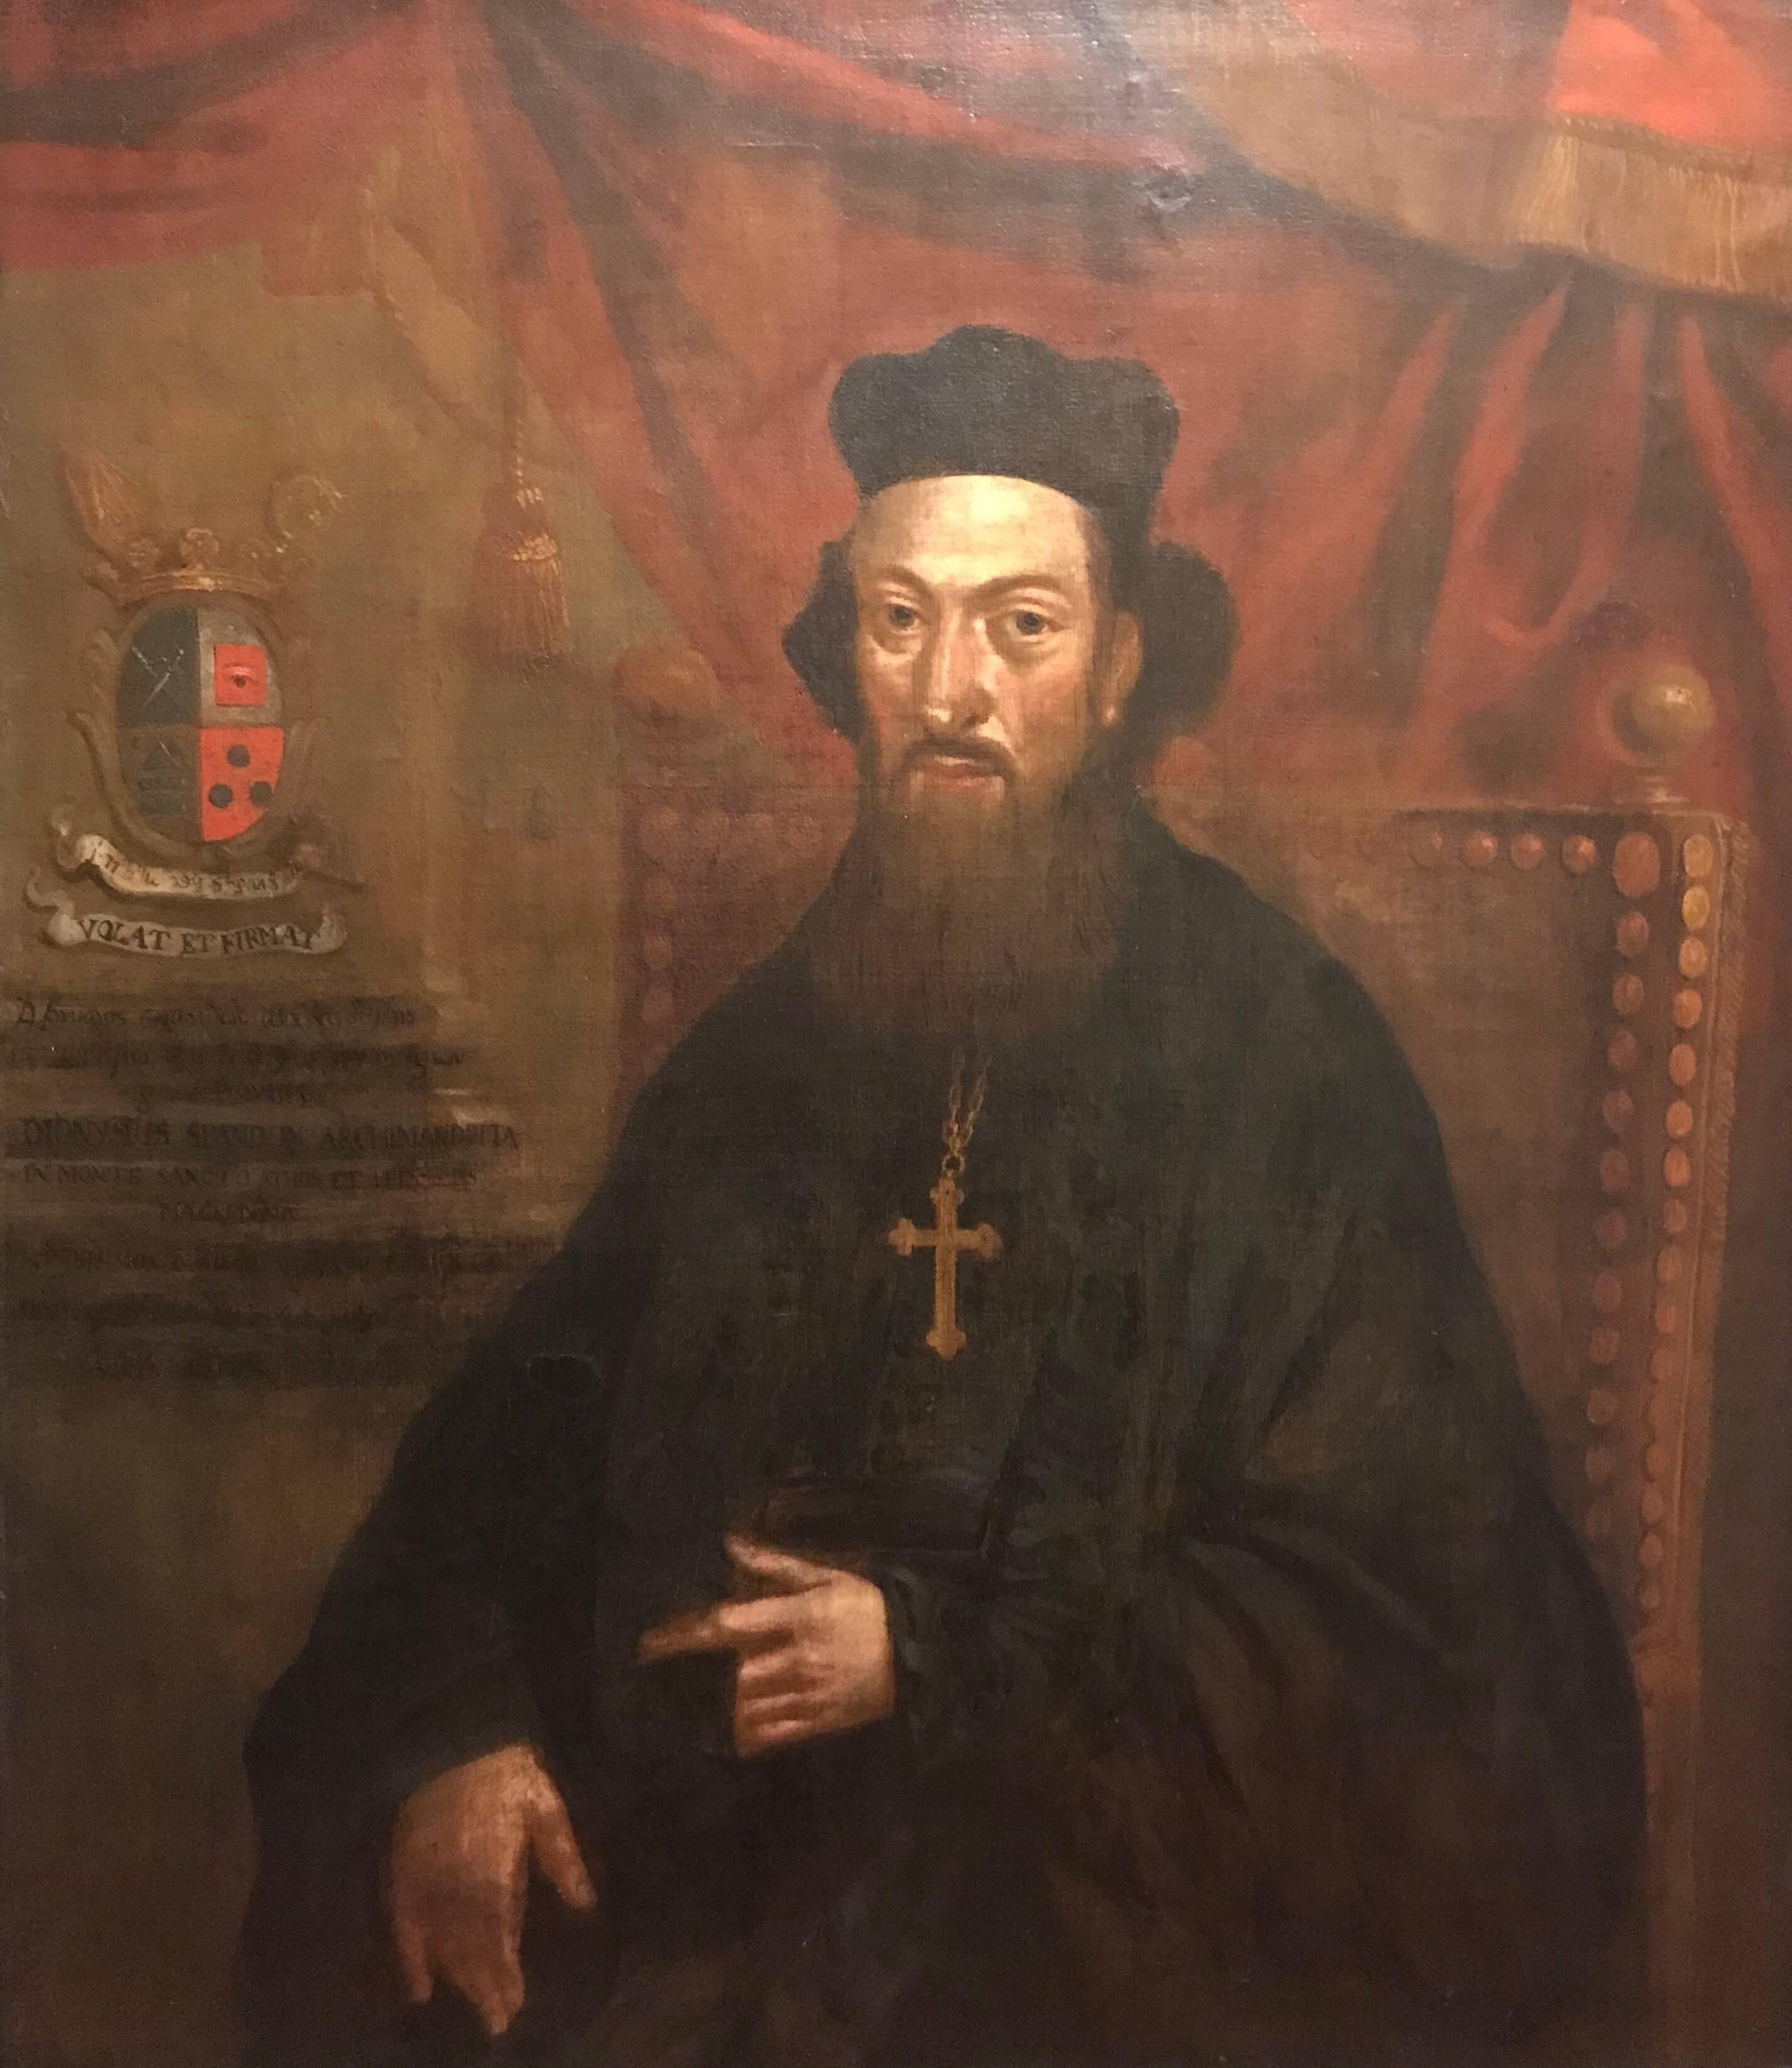 The Archimandrite
Continental School, 18th century
oil painting on canvas, framed

canvas: 38 x 33 inches
framed: 43.5 x 39 inches

Very fine and rare antique portrait of an Orthodox religious figure, believed to be an Archimandrite. The painting,